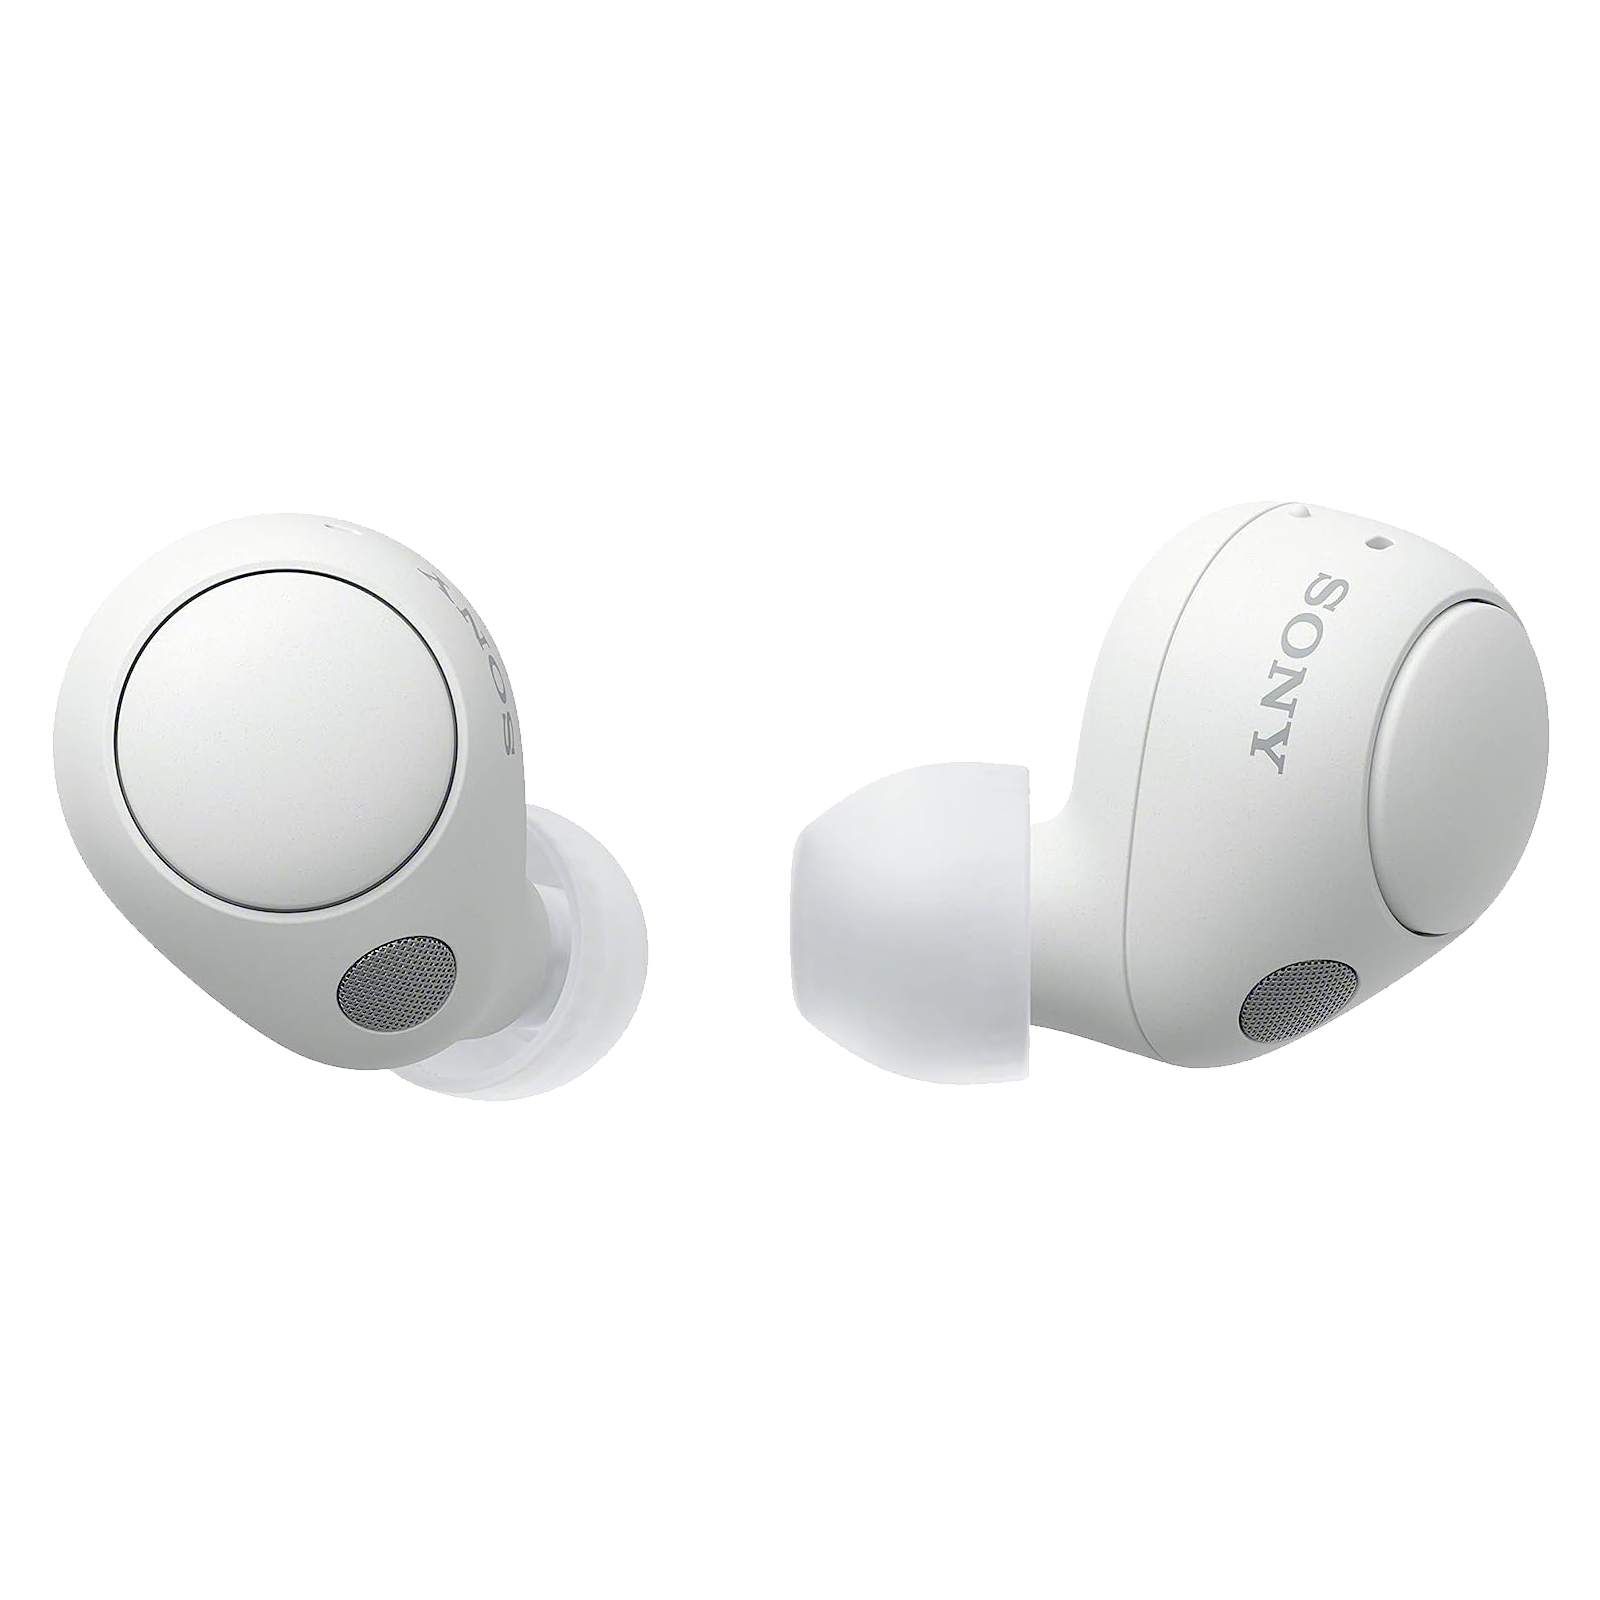 Sony WF-C700N Wireless Earphones noise canceling/ Lightweight and compact  design/ Sound quality upscaling function/ Up to 7.5 hours of continuous  music play/ IPX4 splash resistance White WF-C700N WZ 